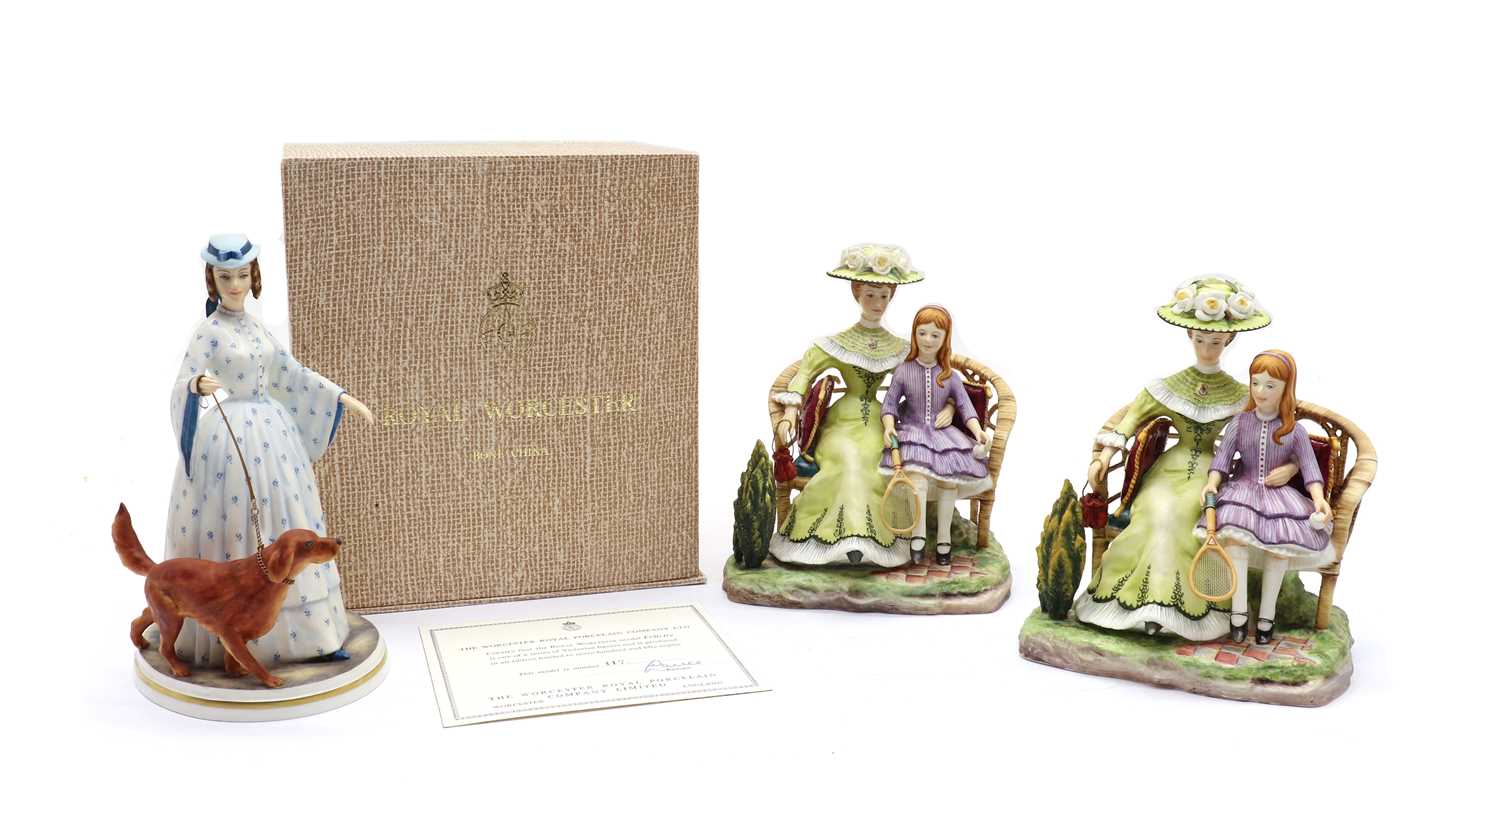 Lot 240 - A pair of Royal Worcester limited edition figure groups